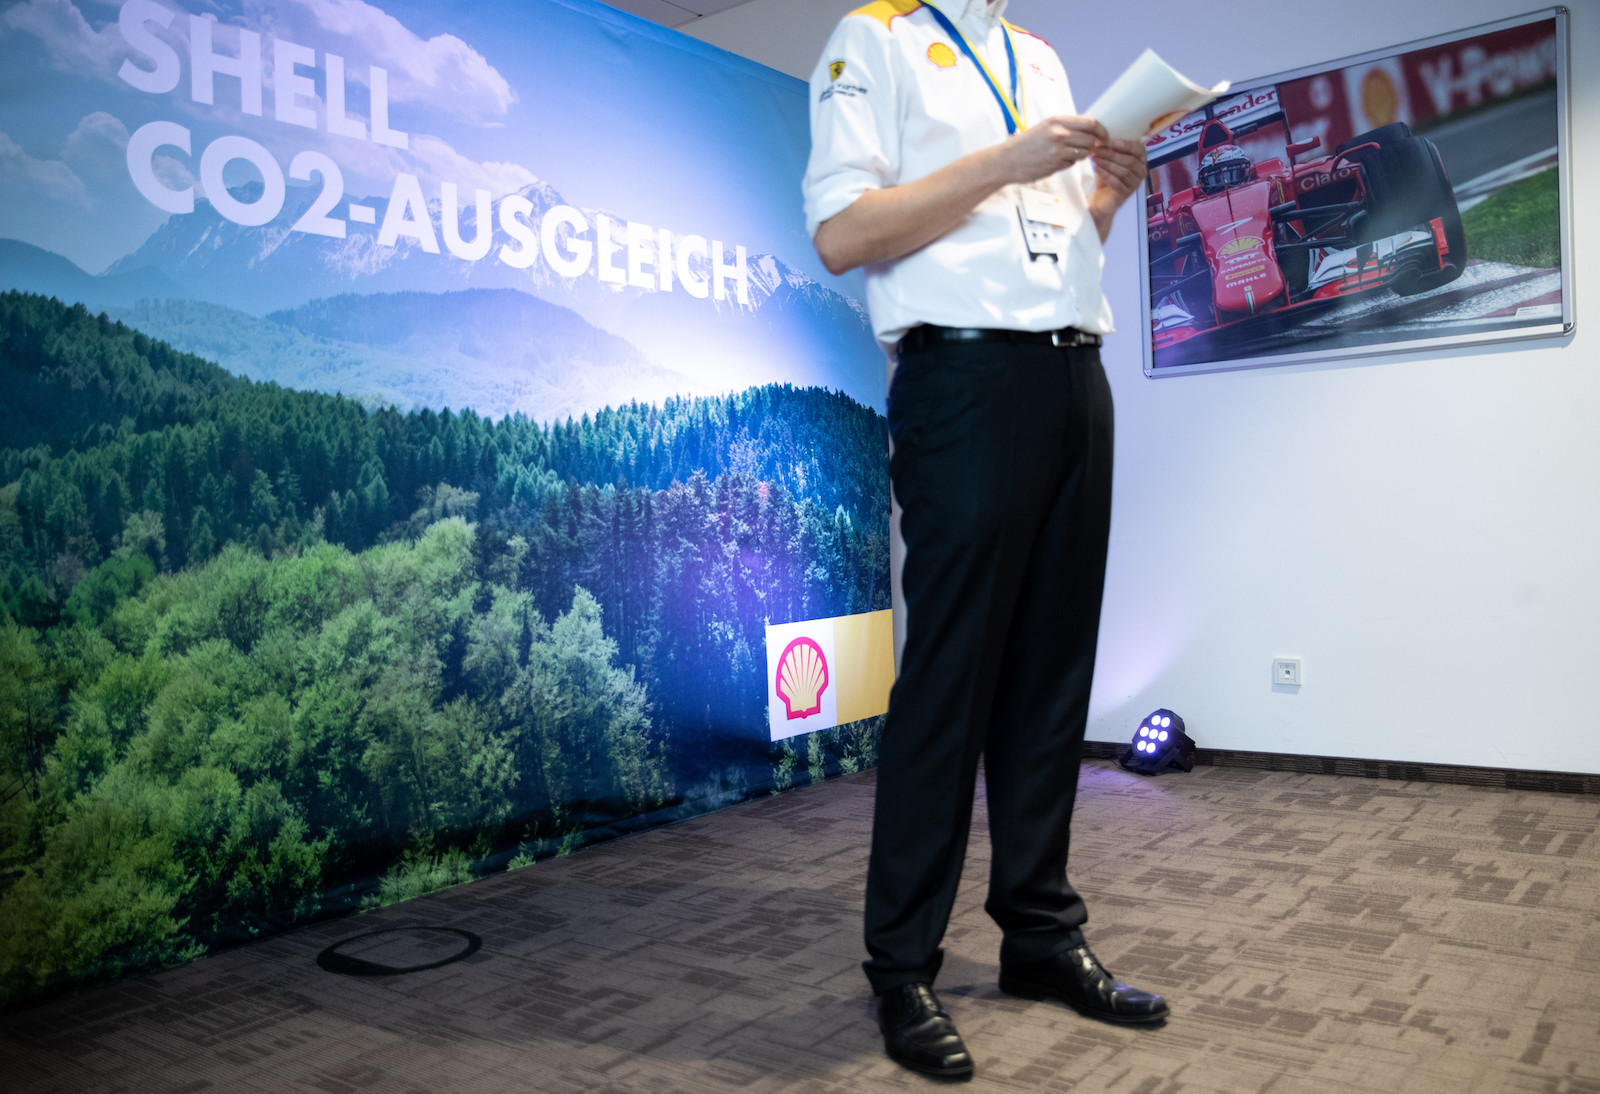 a man in a white shirt and black pans stands in front of a large mural covered in trees promoting a tree-related CO2 offset by Shell company